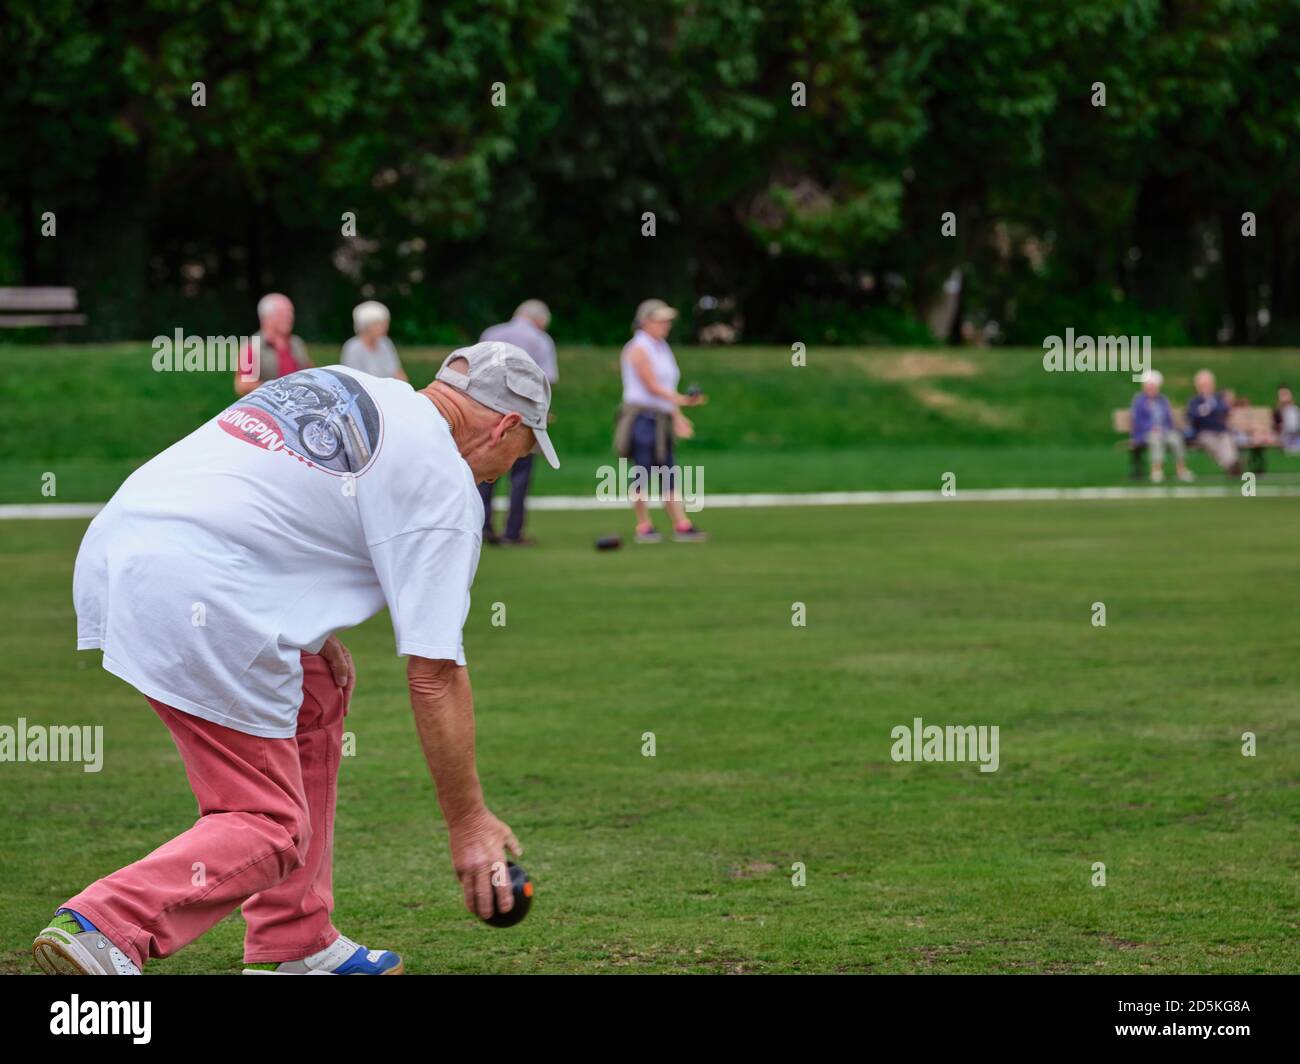 In July, a lone competitor takes time to practice bowls on the crown green at Pateley Bridge, Harrogate, North Yorkshire, England, UK. 21/07/2019. Stock Photo